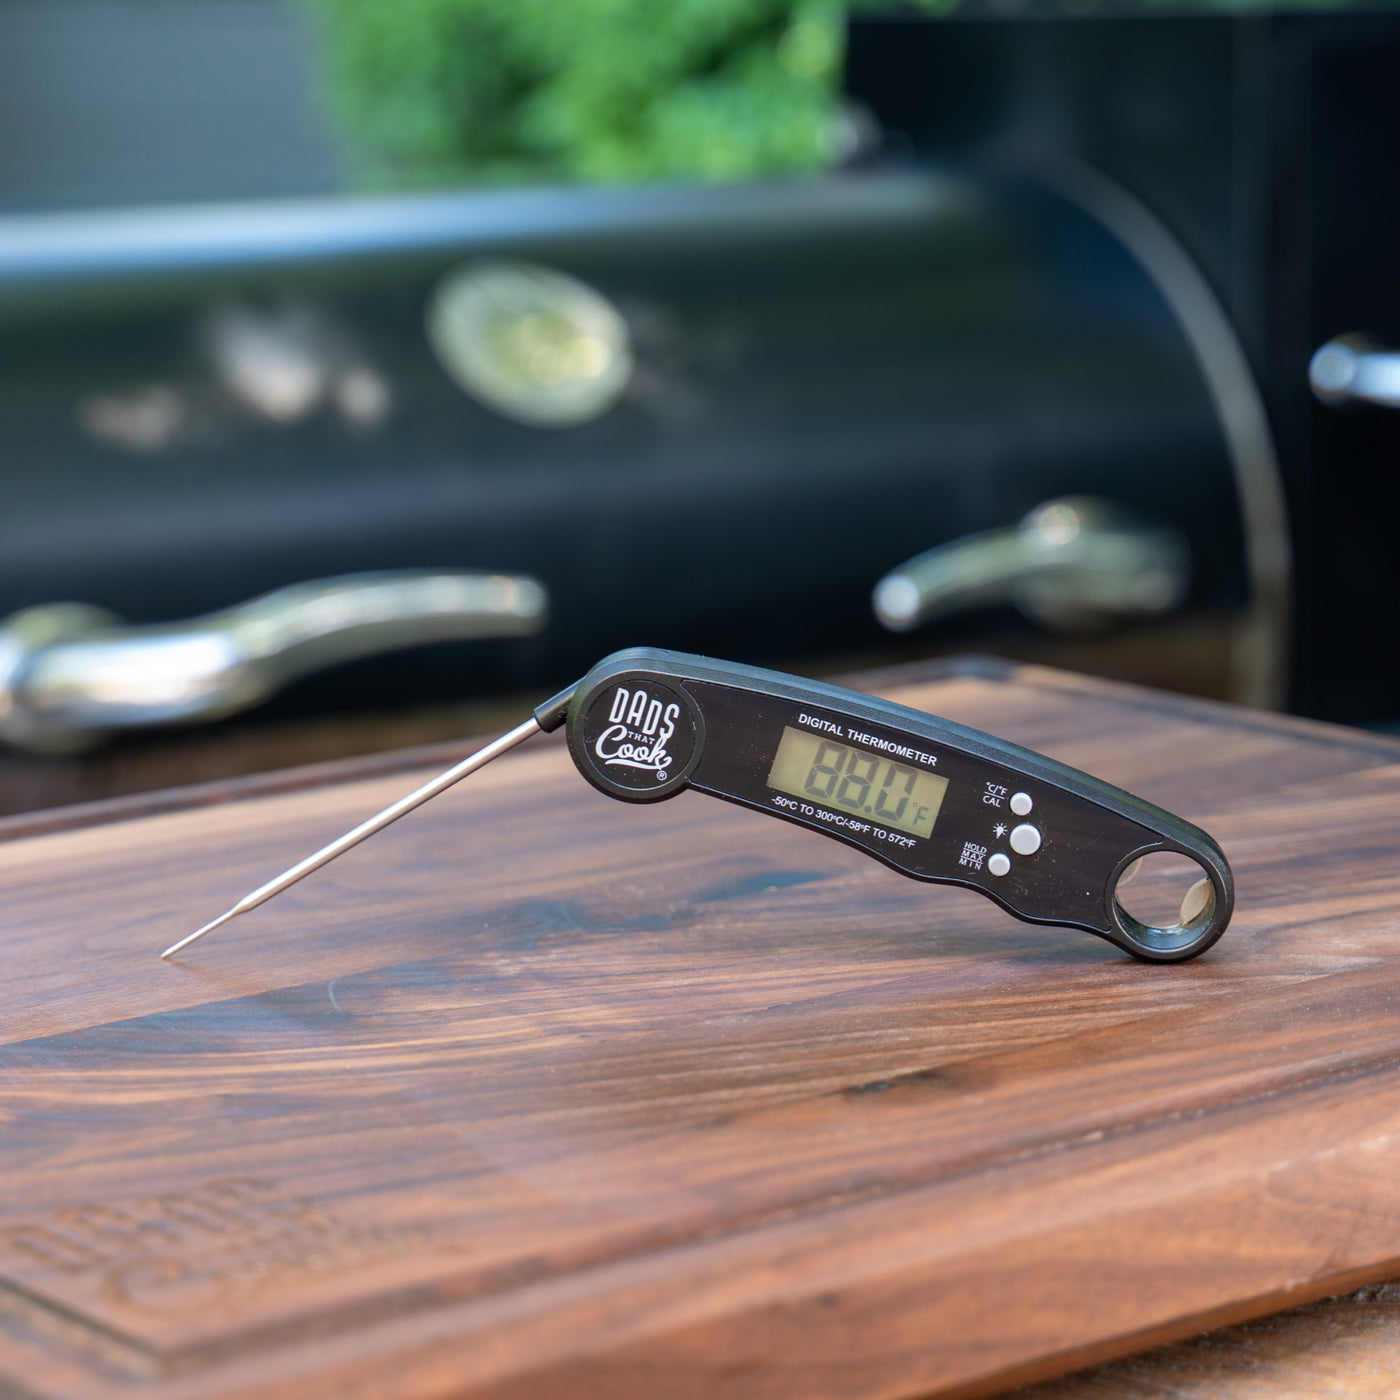 Save on ChefSelect Instant Read Thermometer Order Online Delivery